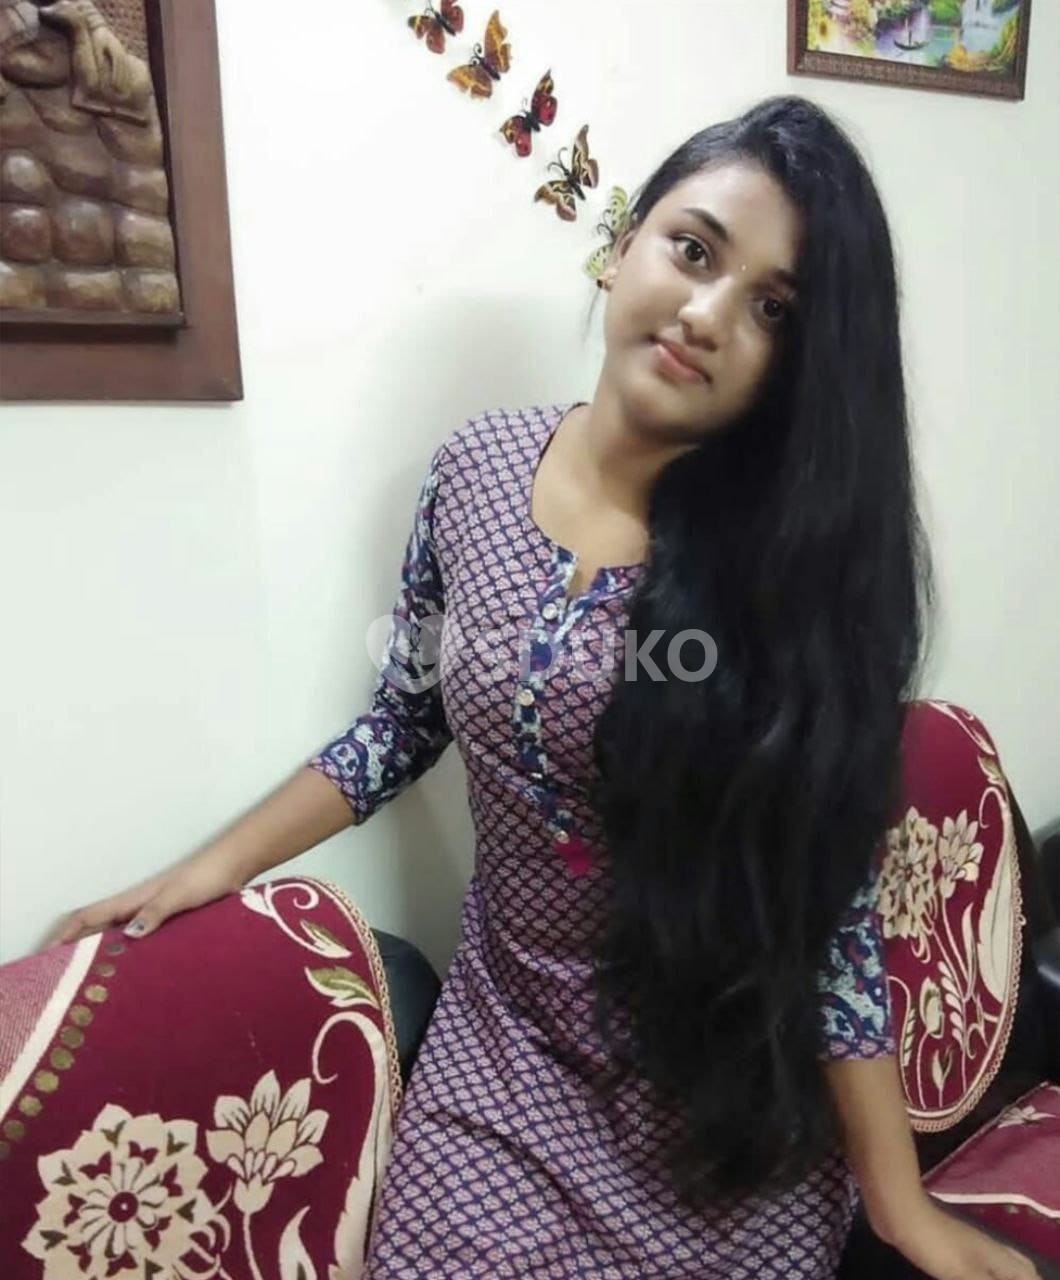 Surat myself Mallika..TODAY LOW PRICE 100%BEST HOT GIRLS SAFE AND SECURE GENUINE CALL GIRL AFFORDABLE PRICE BOTH OF YOU 